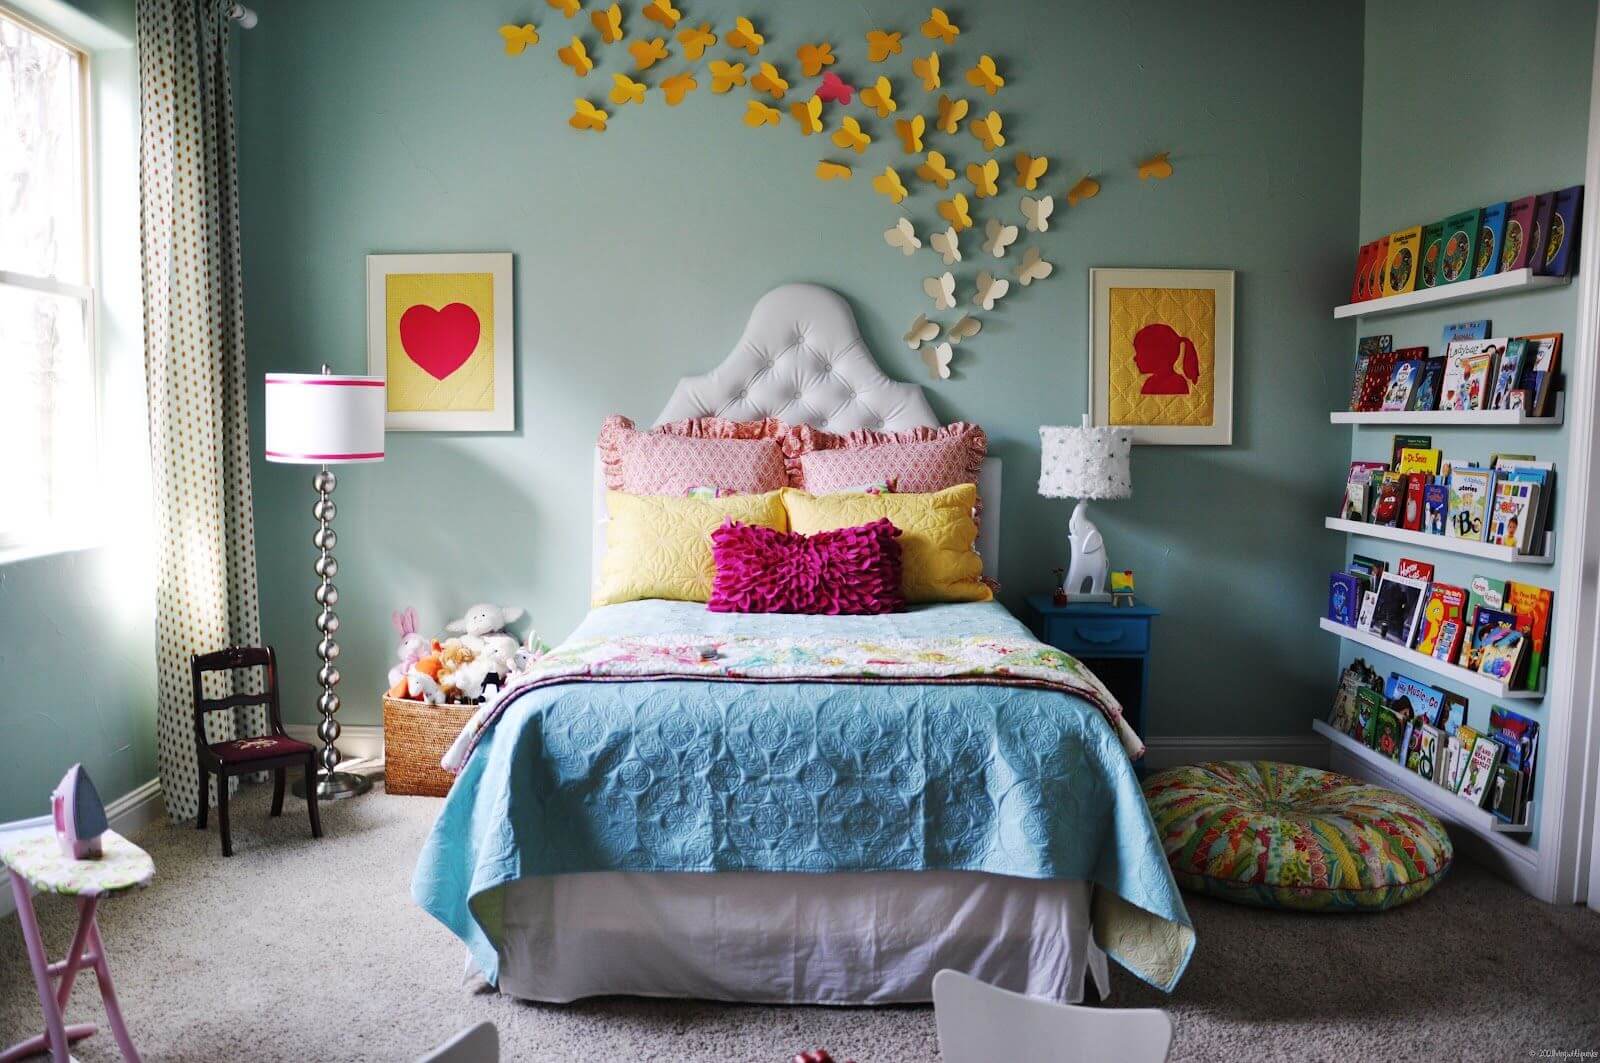 How to decorate your teenager’s bedroom